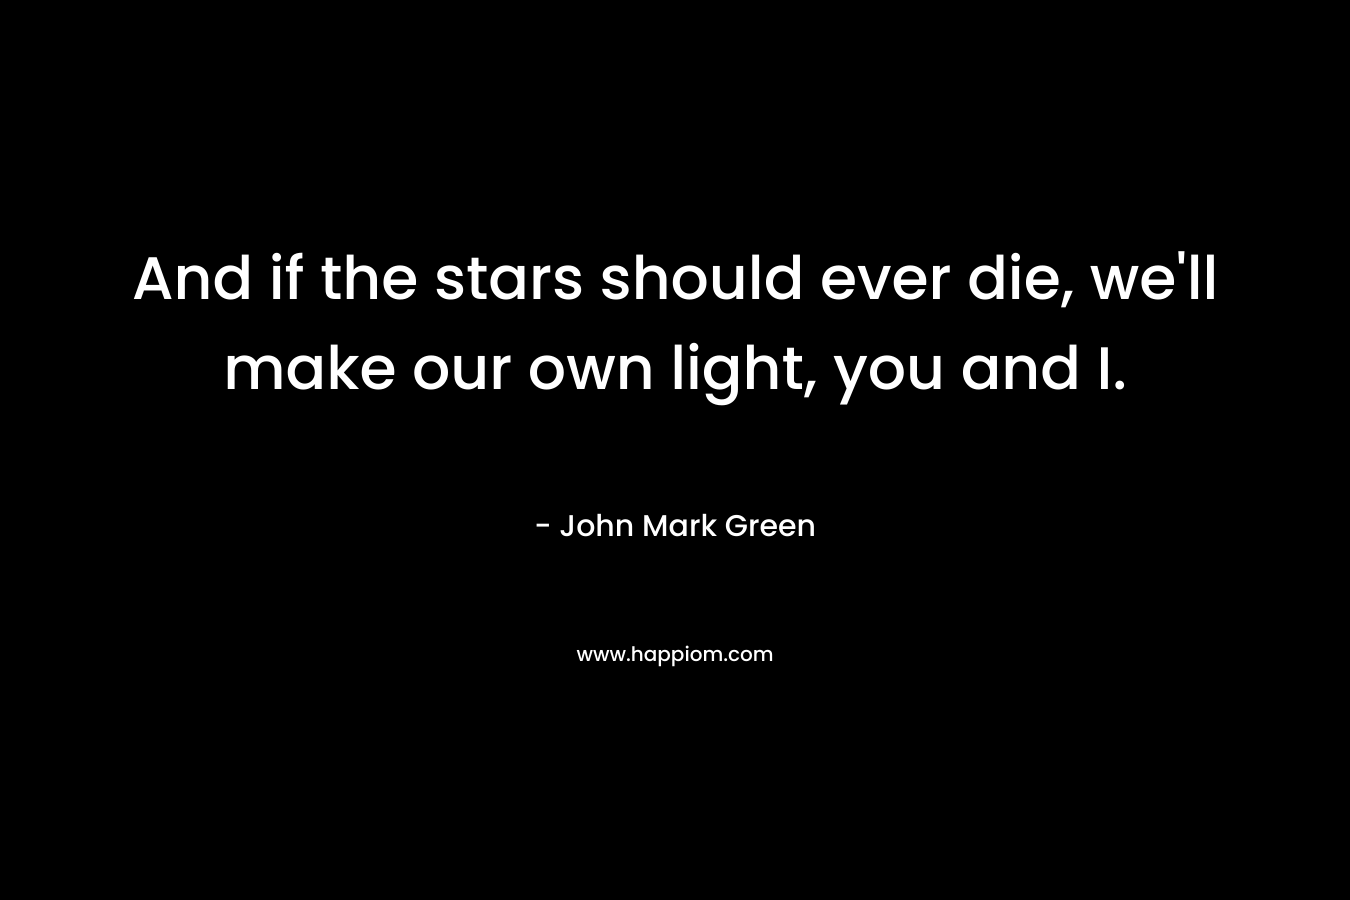 And if the stars should ever die, we'll make our own light, you and I.